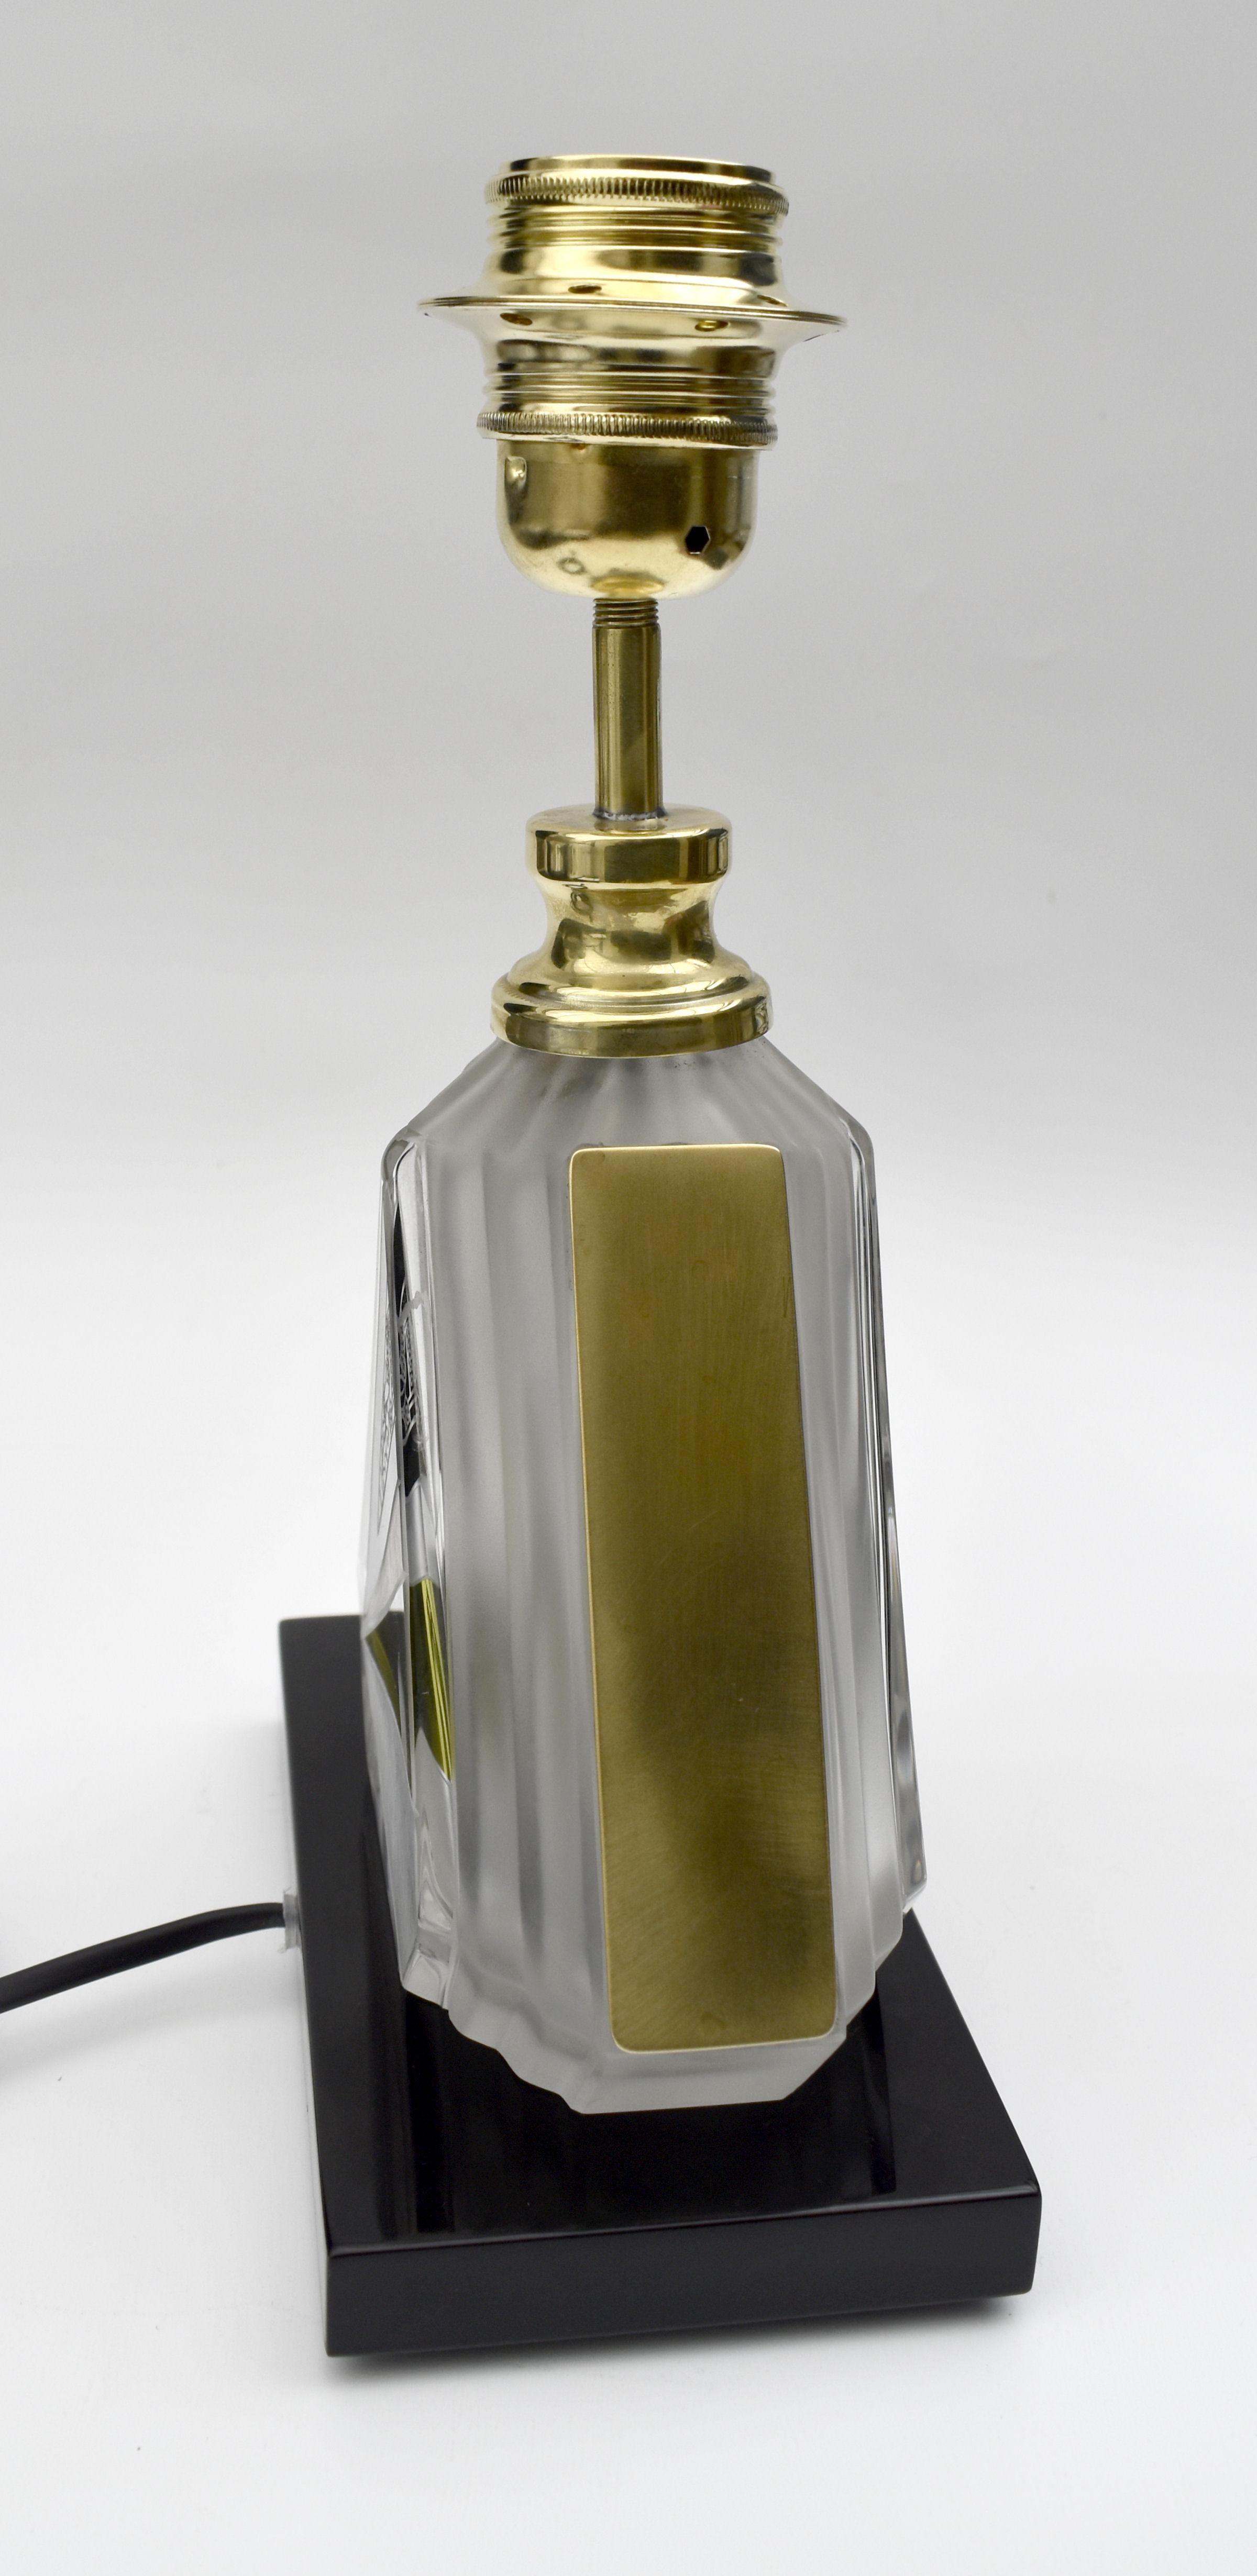 Art Deco Iconic Glass Table Lamp By Karl Palda, c1930 In Good Condition For Sale In Devon, England